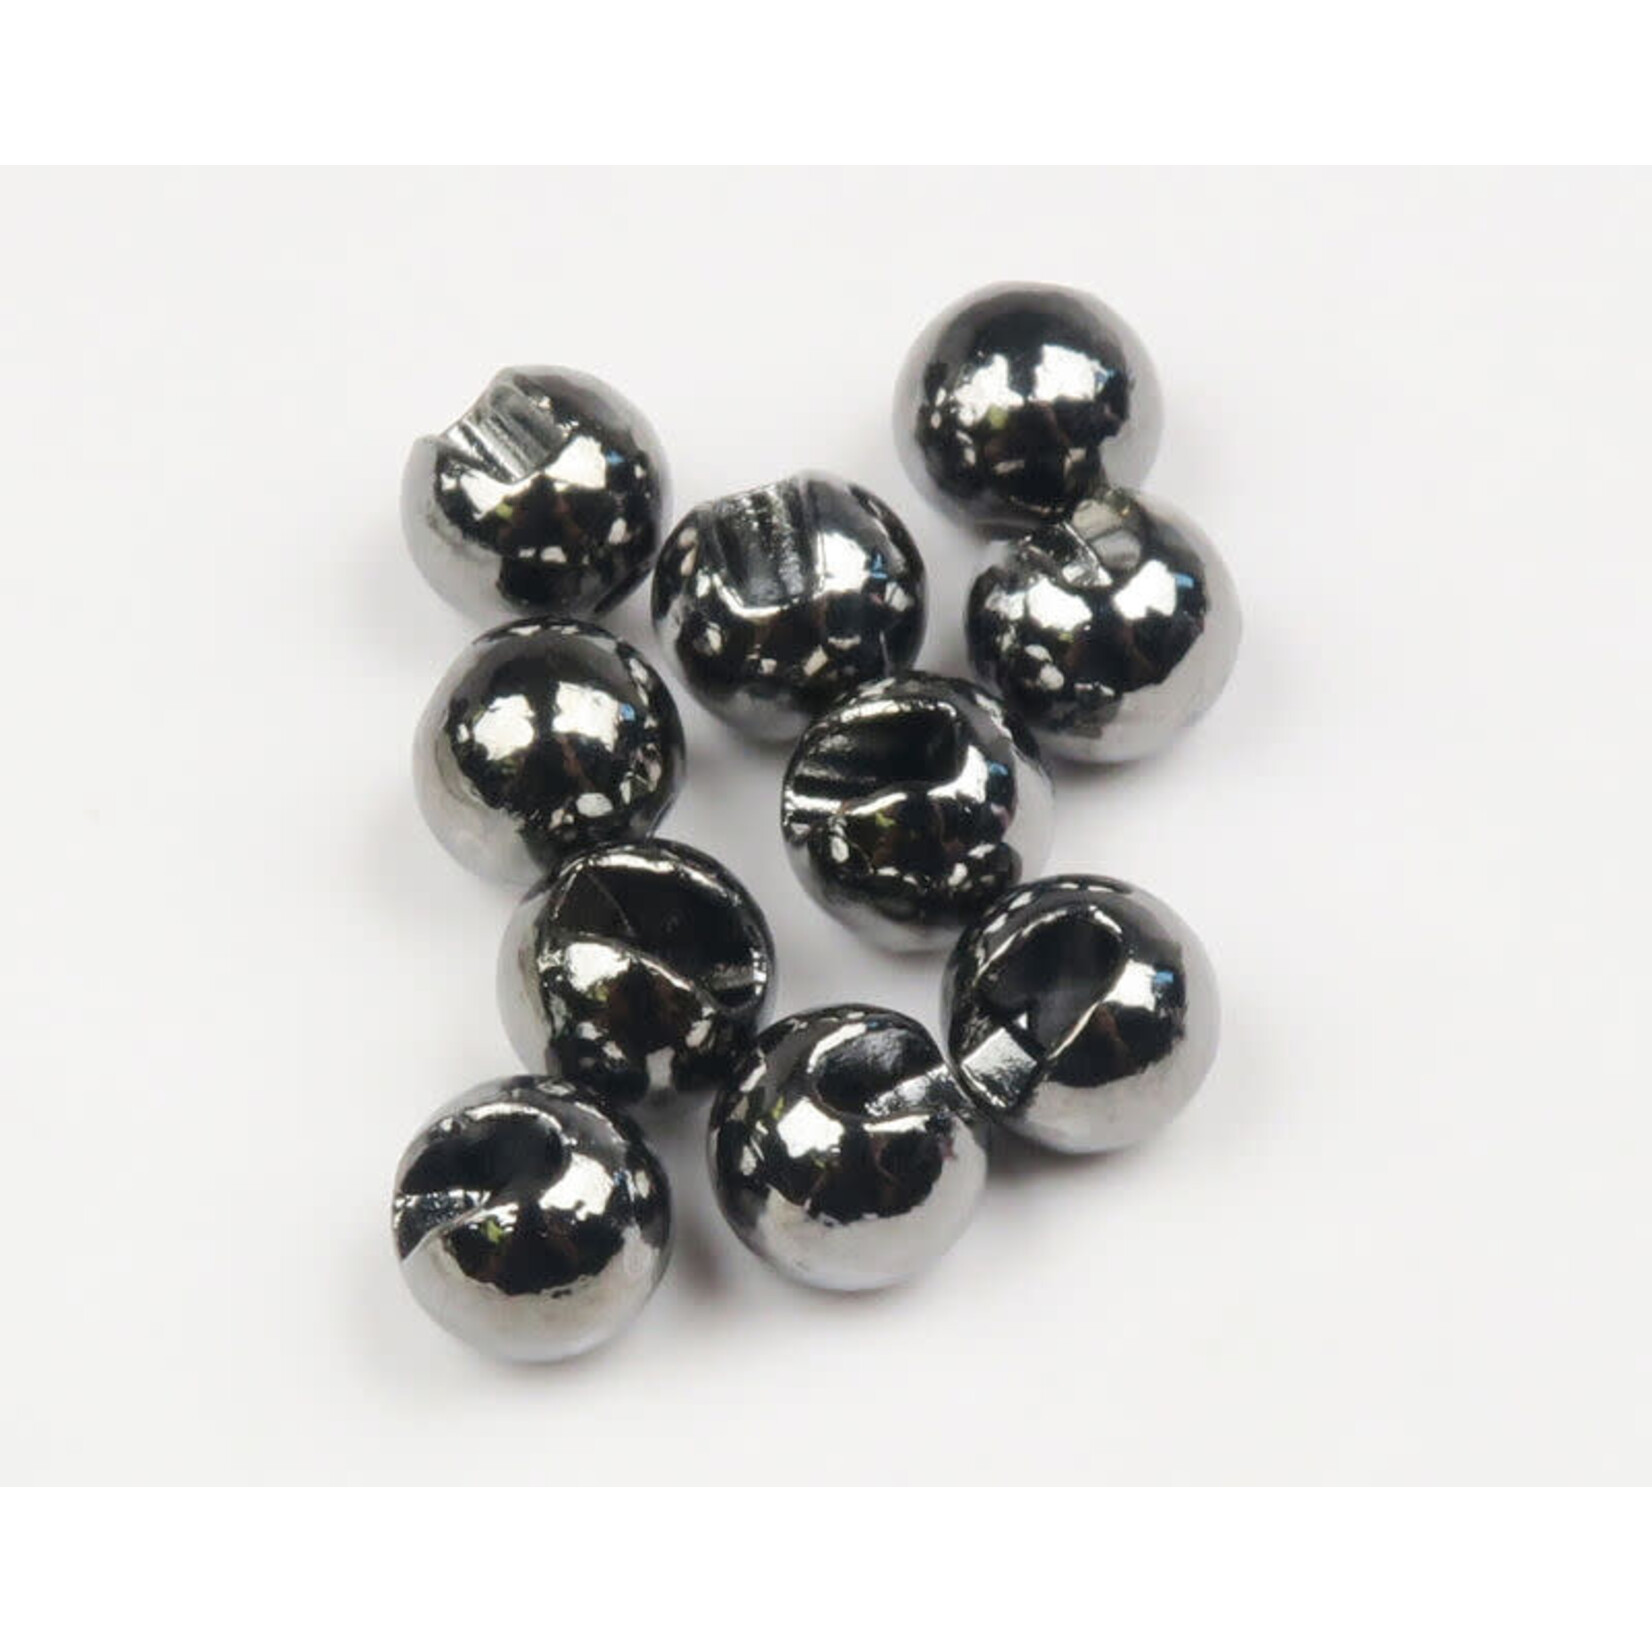 HARELINE 1/4 6.3mm Spawn's Super Tungsten Slotted Beads